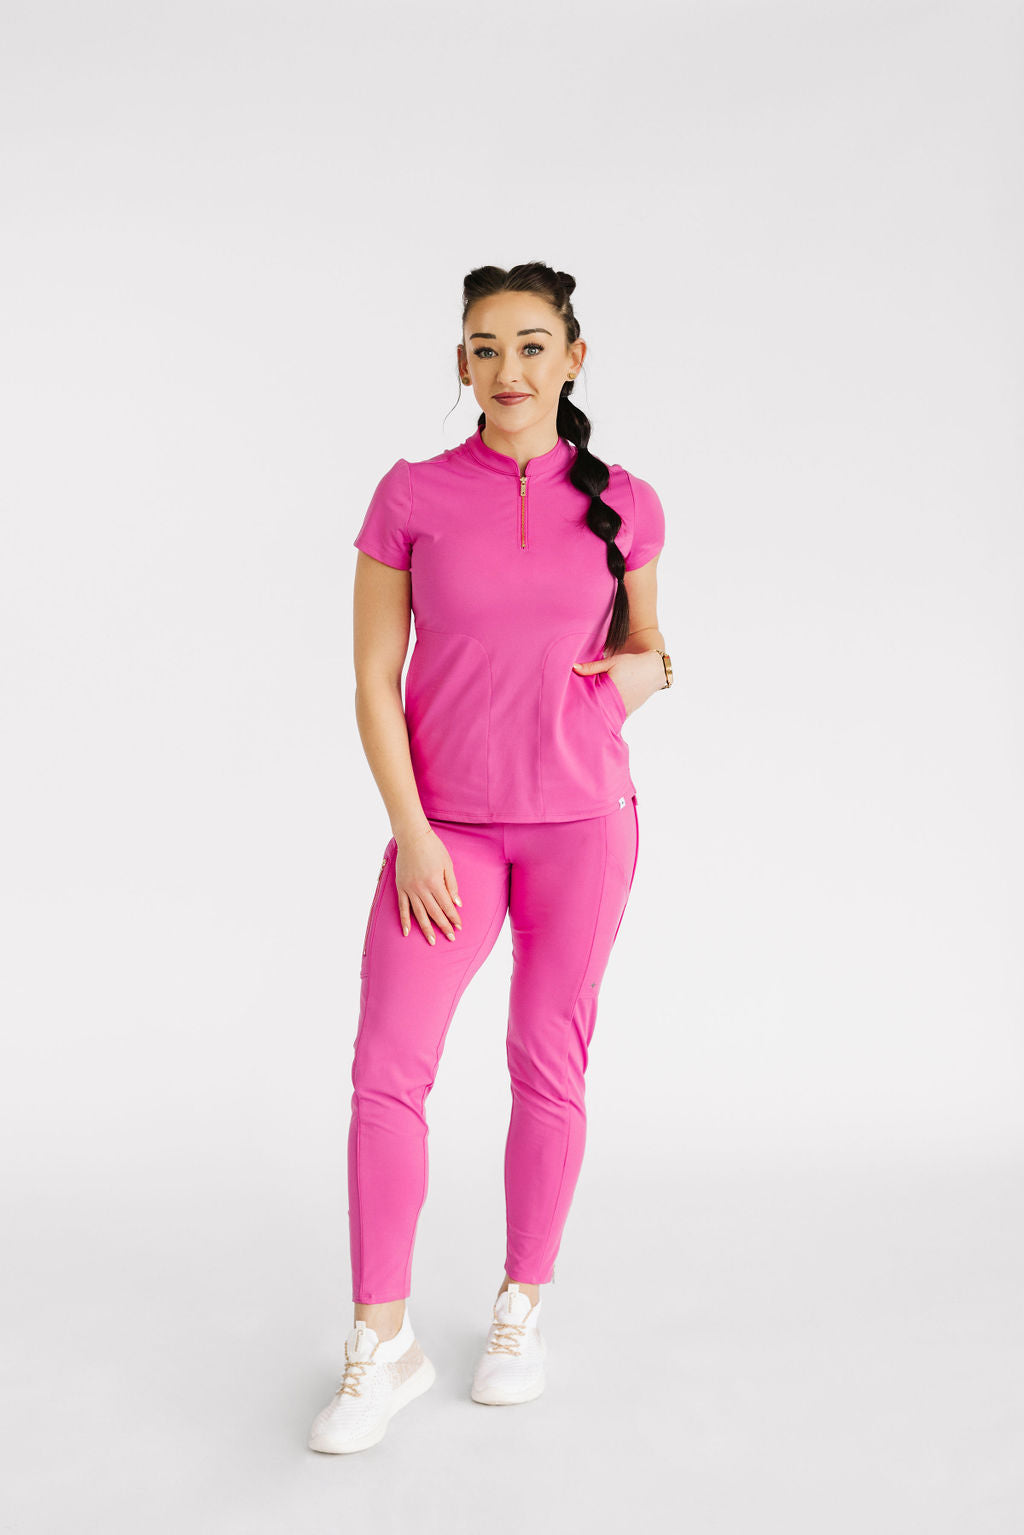 fitted women's scrubs